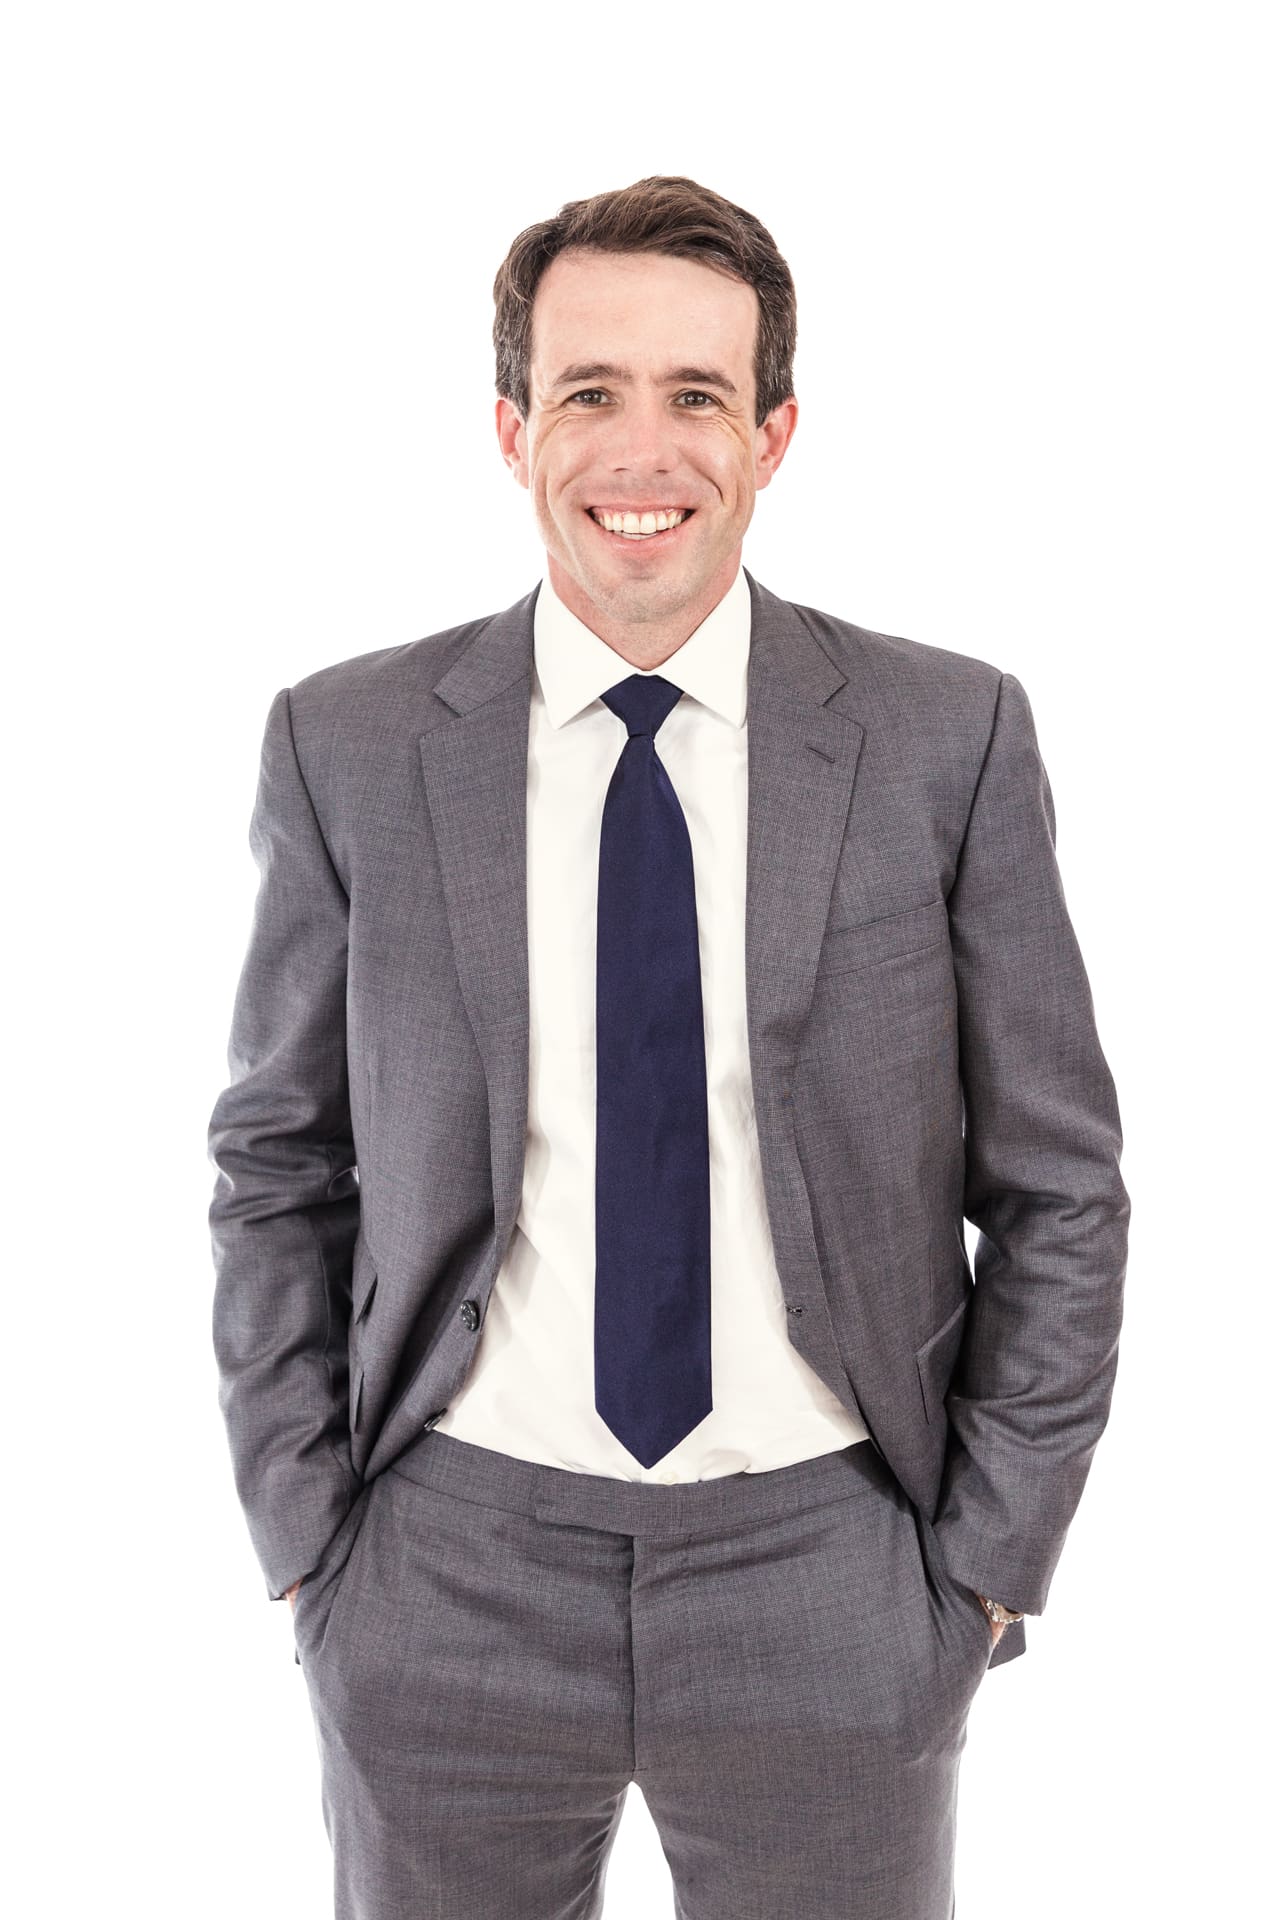 Headshot of man smiling in gray suit and blue tie with white backdrop at Chicago photography studio P&M Studio